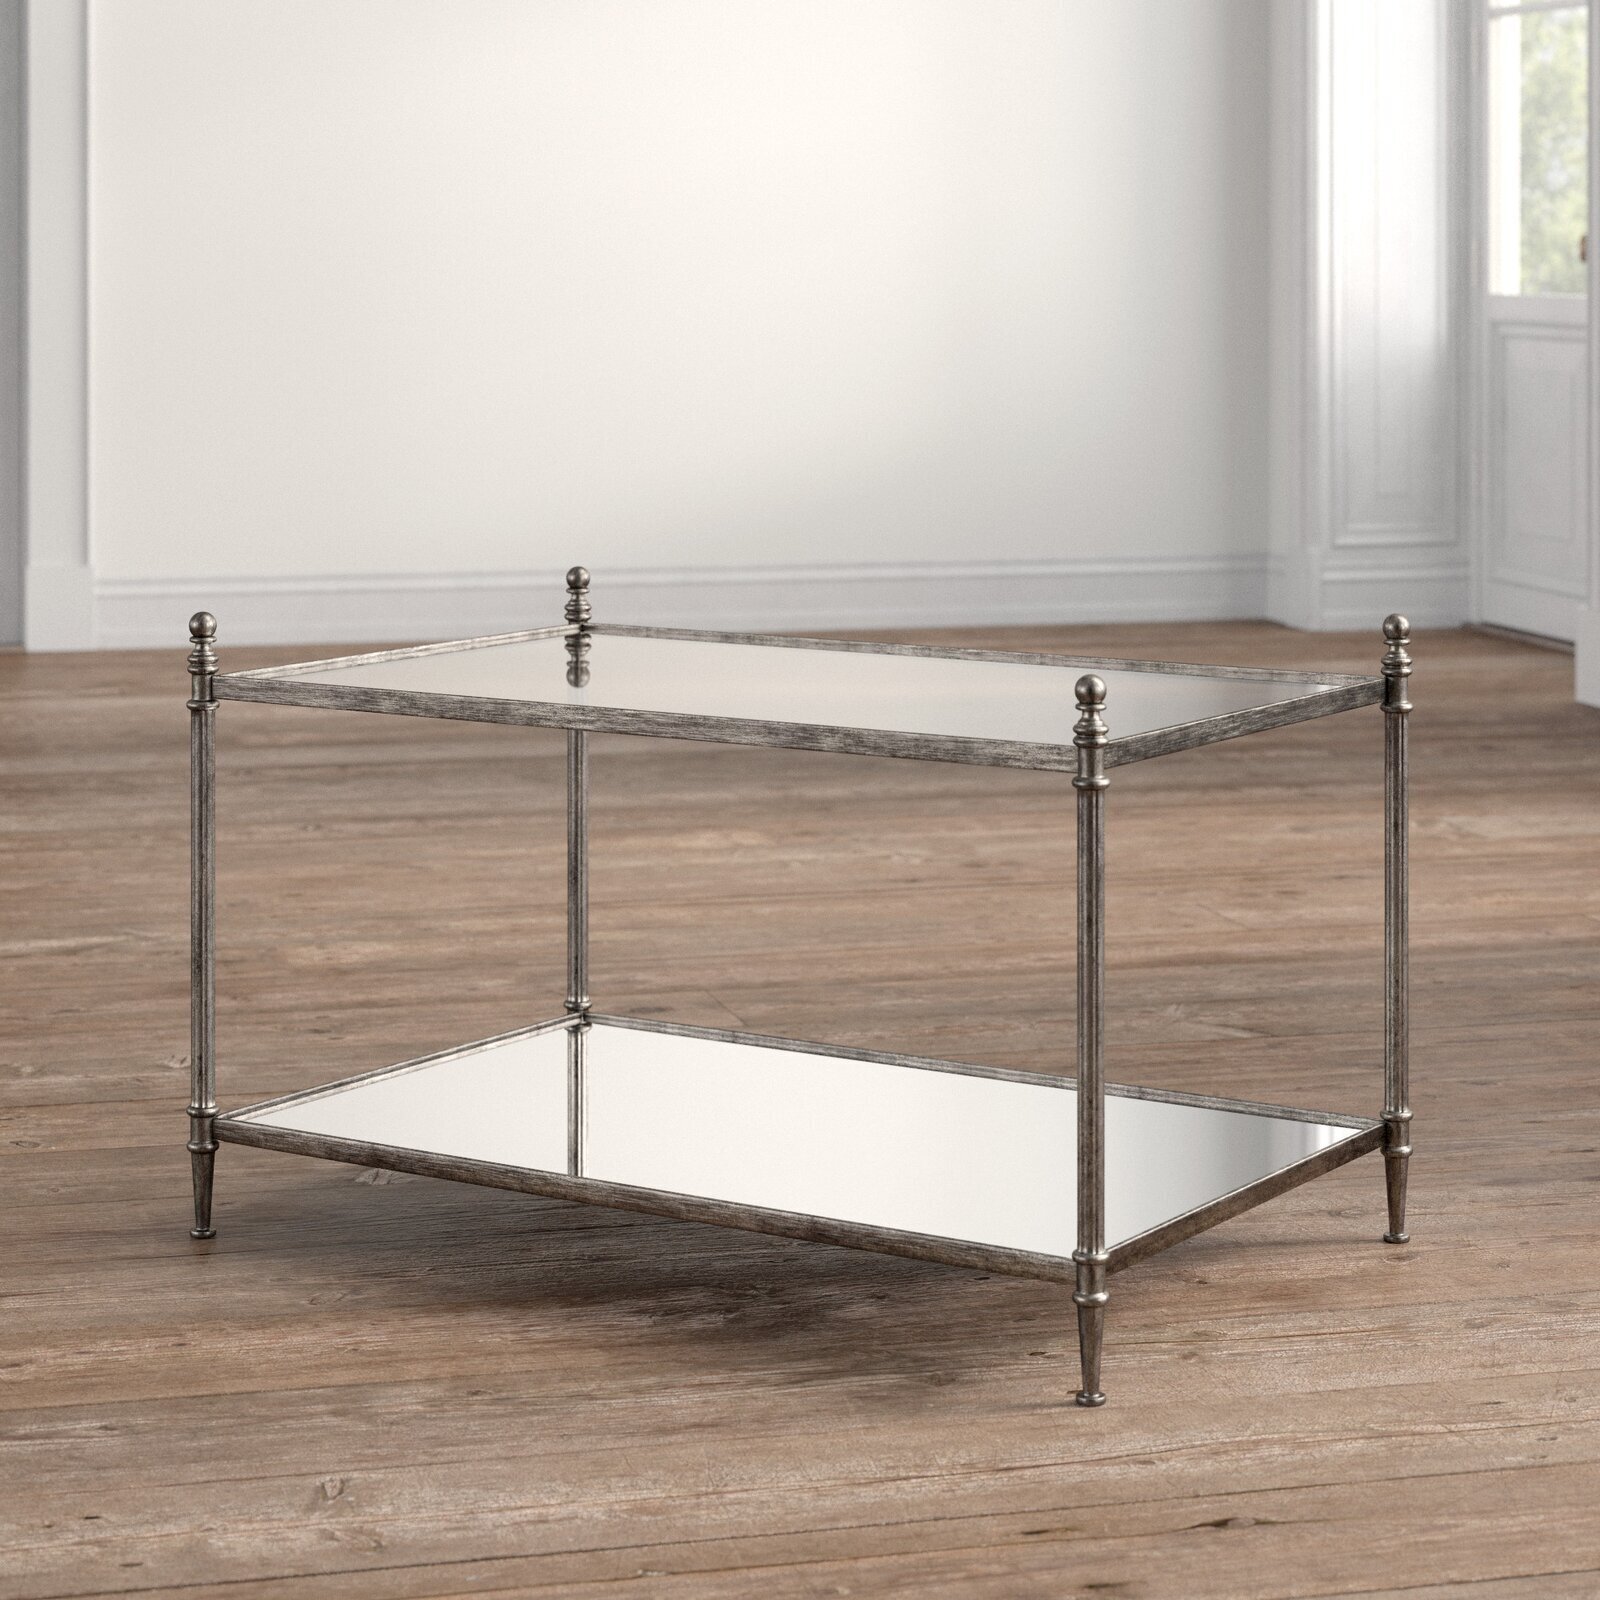 Wrought iron and glass coffee table with storage